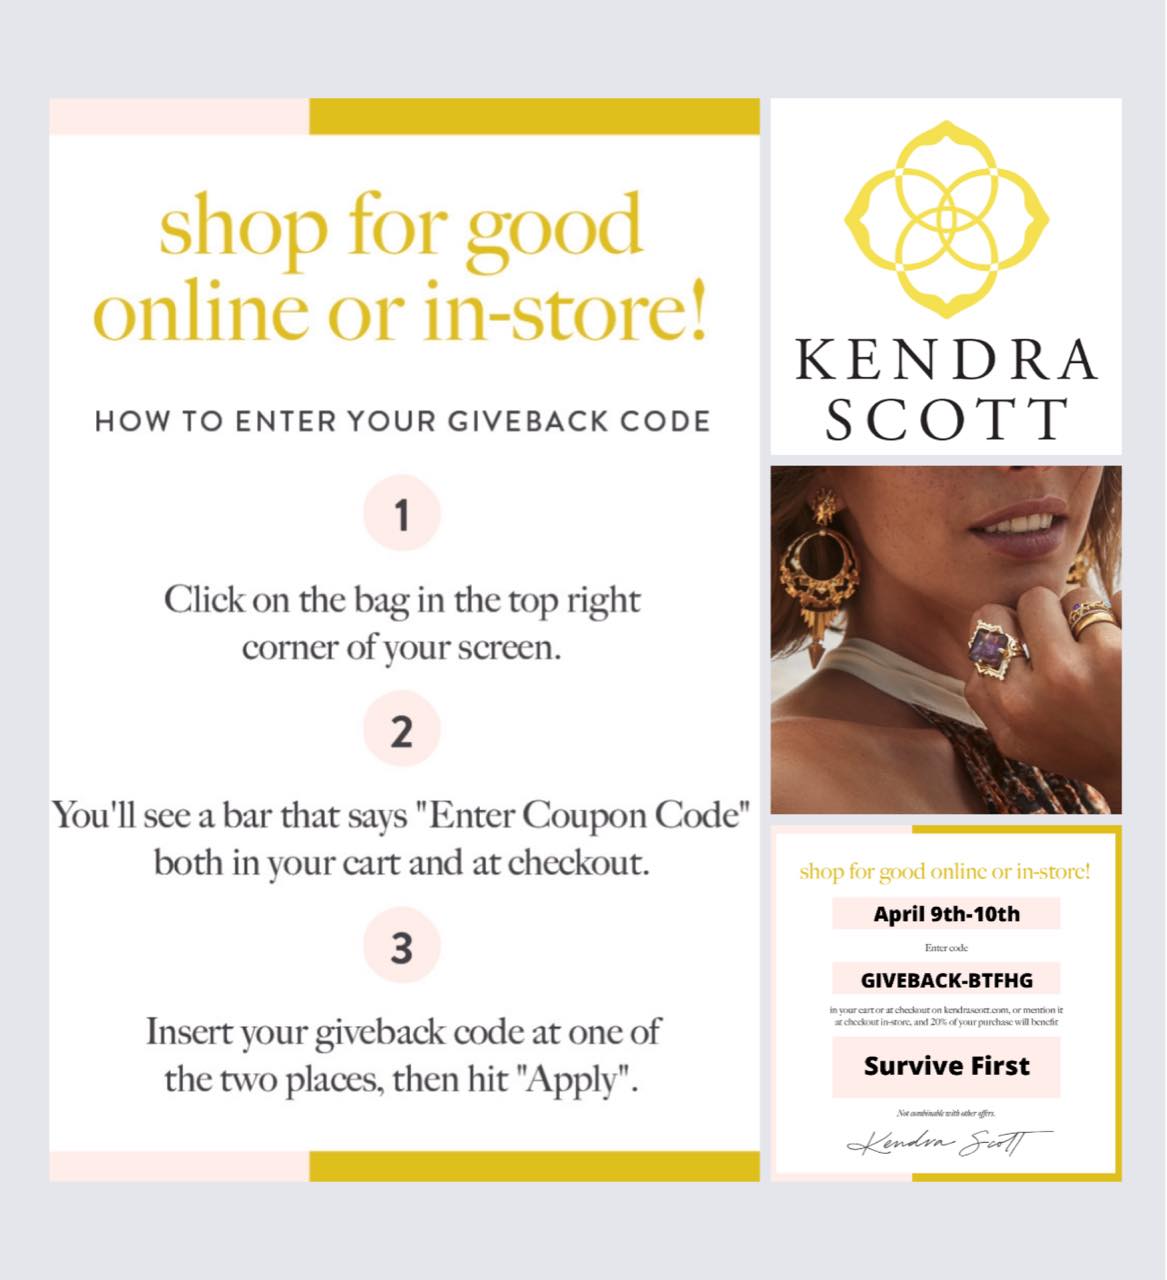 Kendra Scott at the Mall at Millenia in Orlando Florida